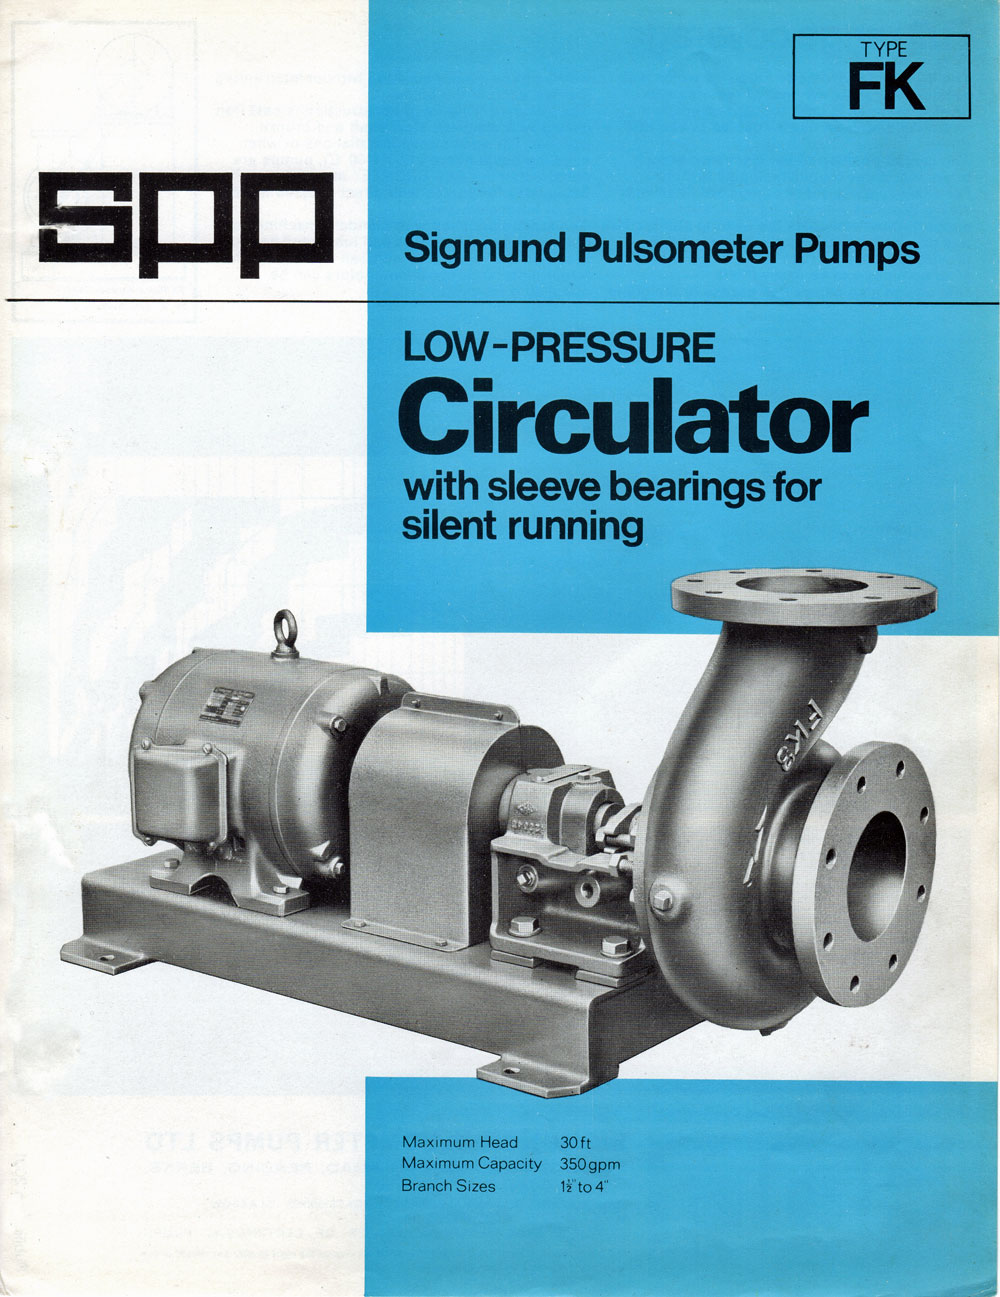 sigmund pulsometer pumps - type FK sleeve bearing end-suction pumps